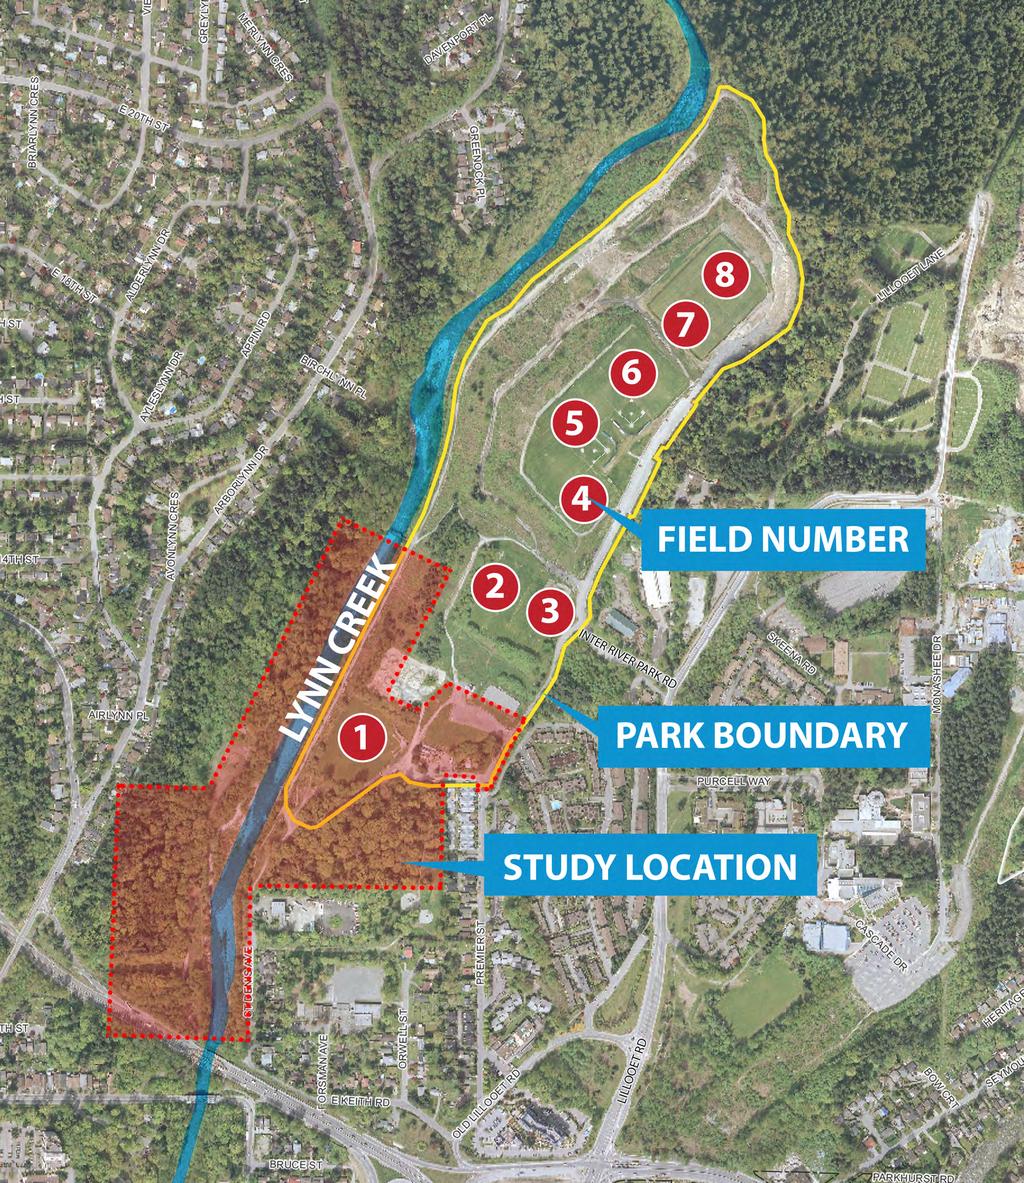 Project Background Study Area The study area is located at the south end of, and includes Field #1, as well as surrounding wetlands, forests, roads/parking, trails and the District nursery and